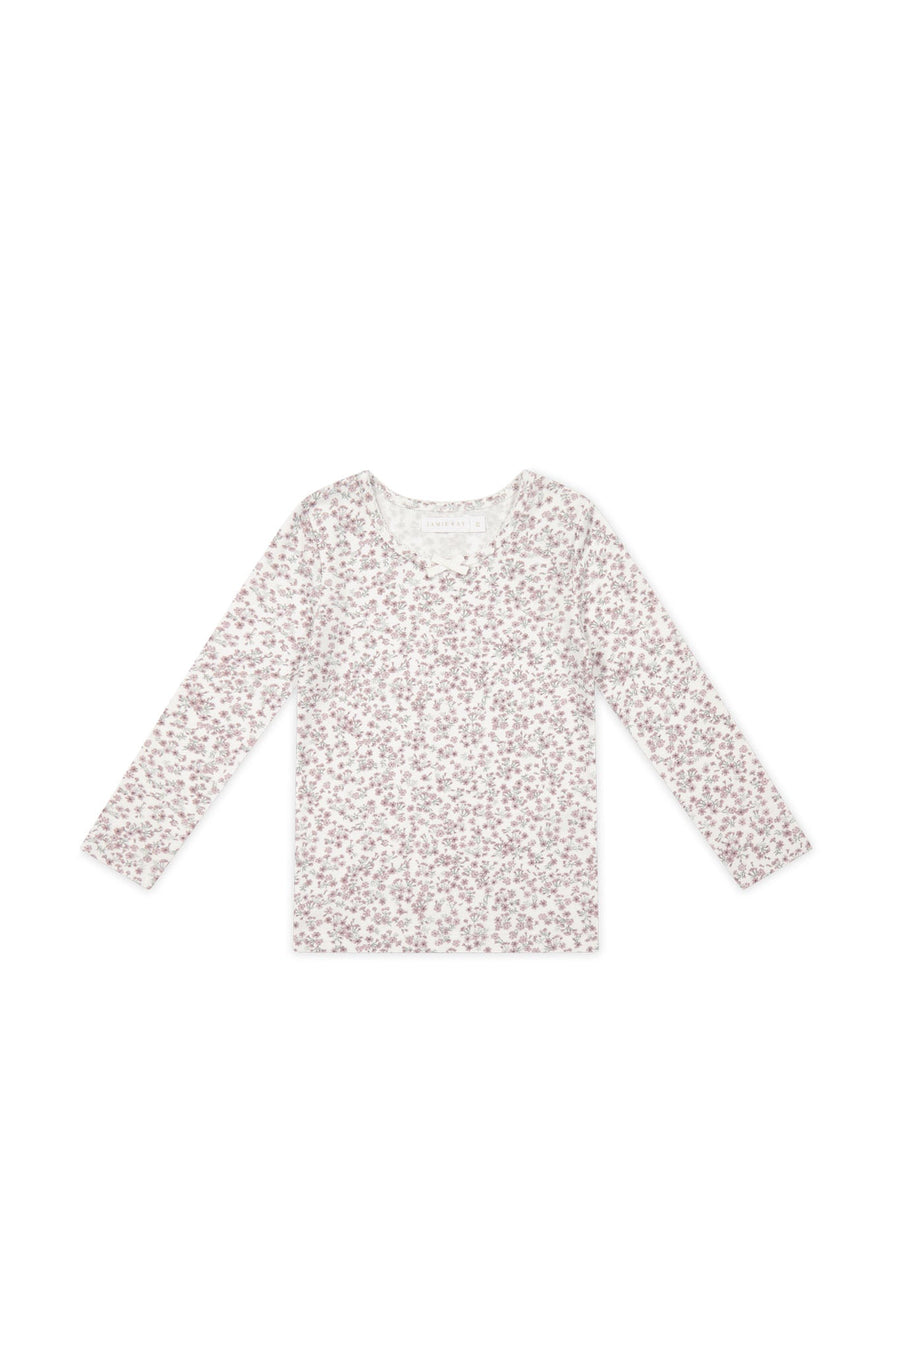 Organic Cotton Long Sleeve Top - Posy Floral Childrens Top from Jamie Kay USA